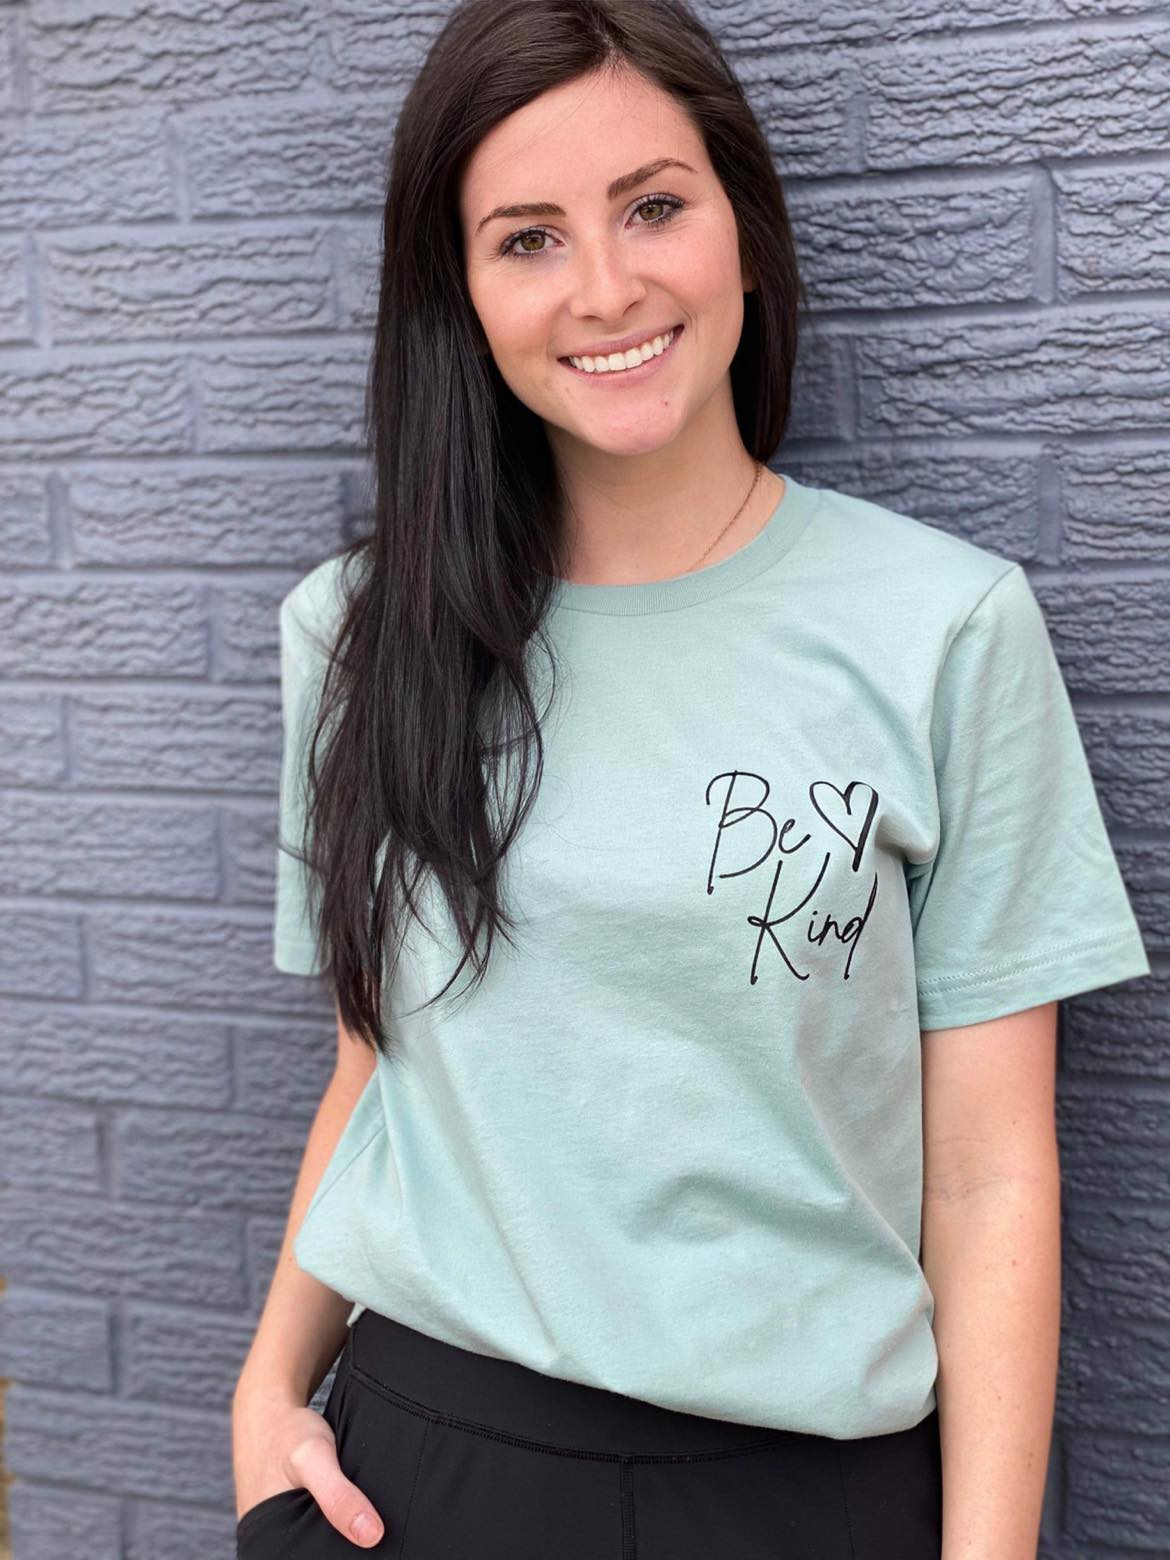 Be Kind Dear Person Behind Me Tee